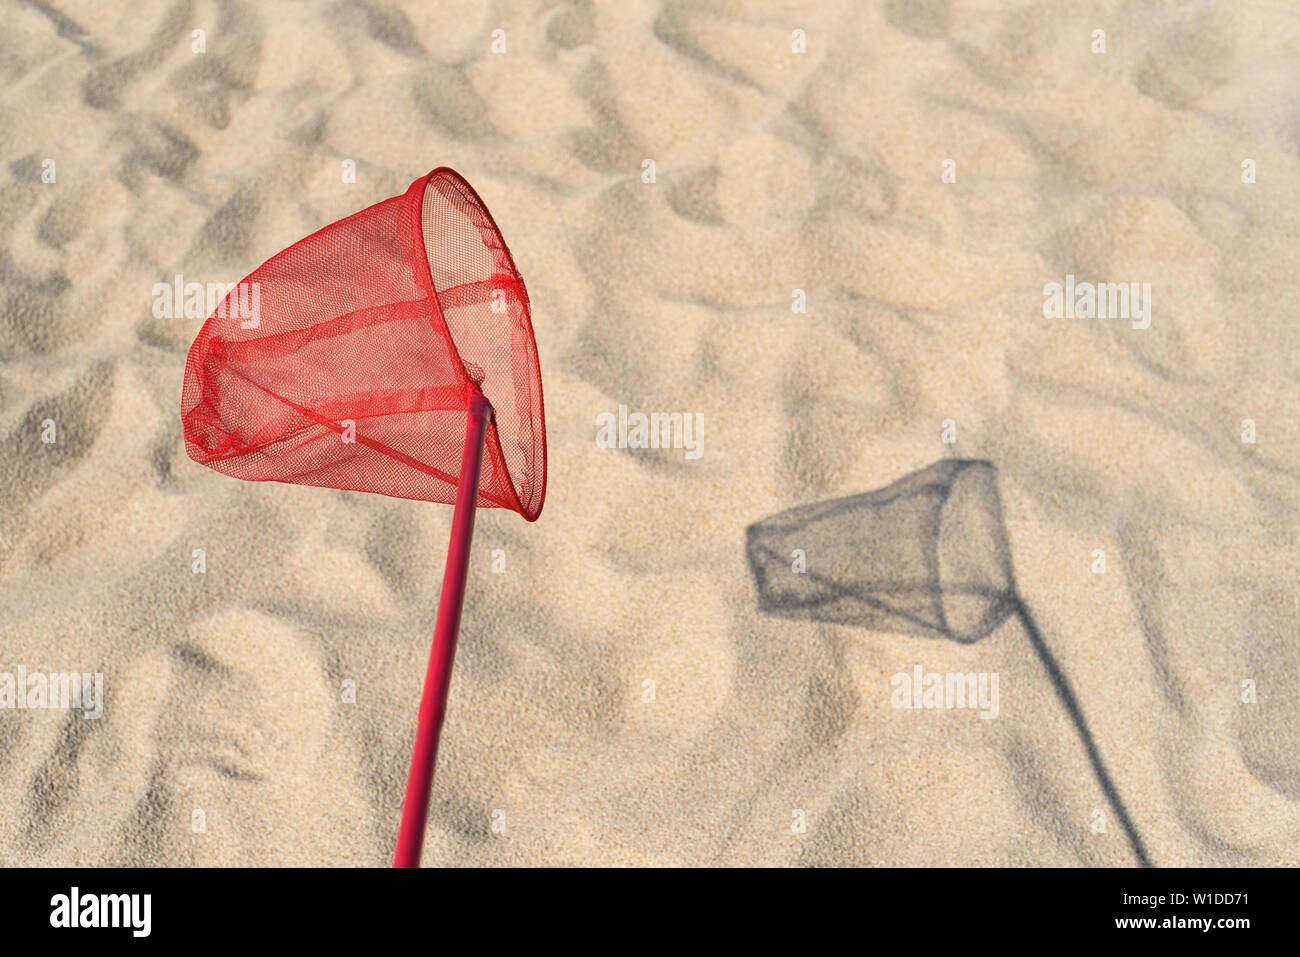 Summer fun for kids. Entertainment on a sandy beach by the sea. Red butterfly net for catching butterflies and fish Stock Photo